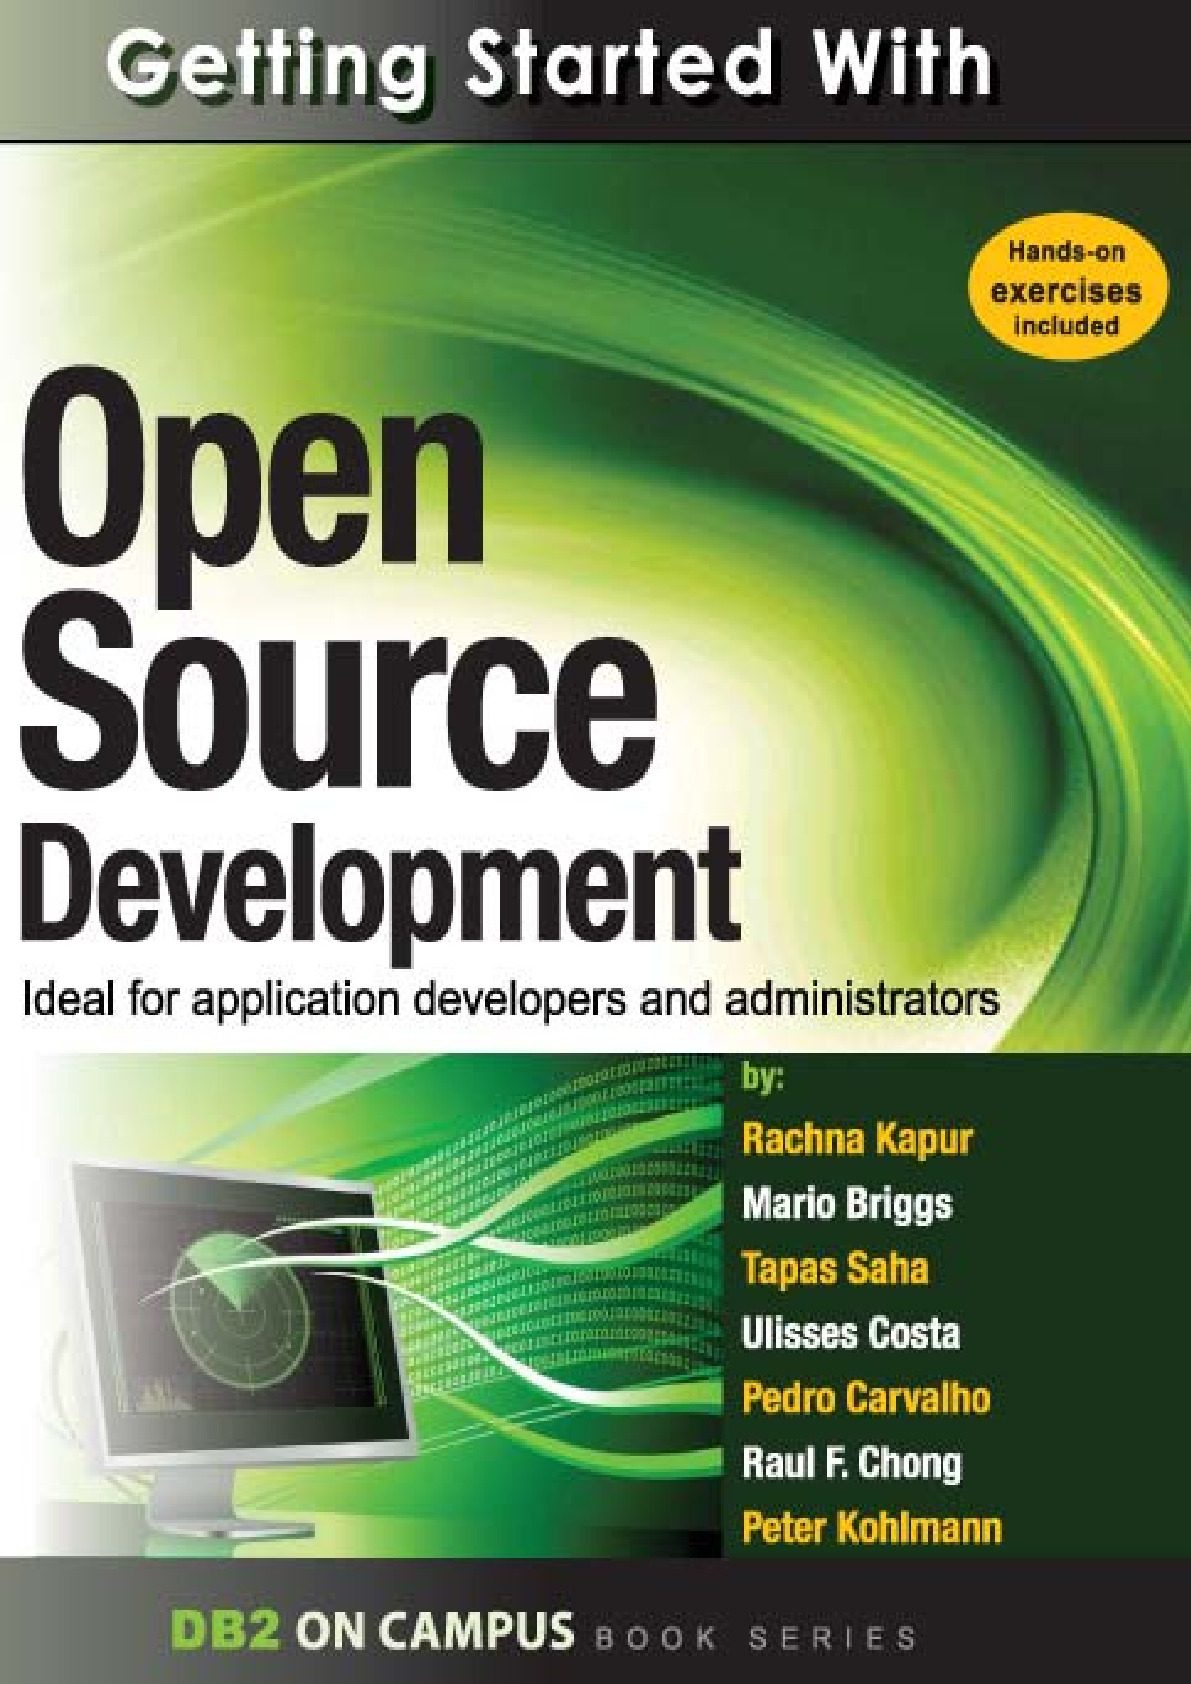 Getting_started_with_open_source_development_p2